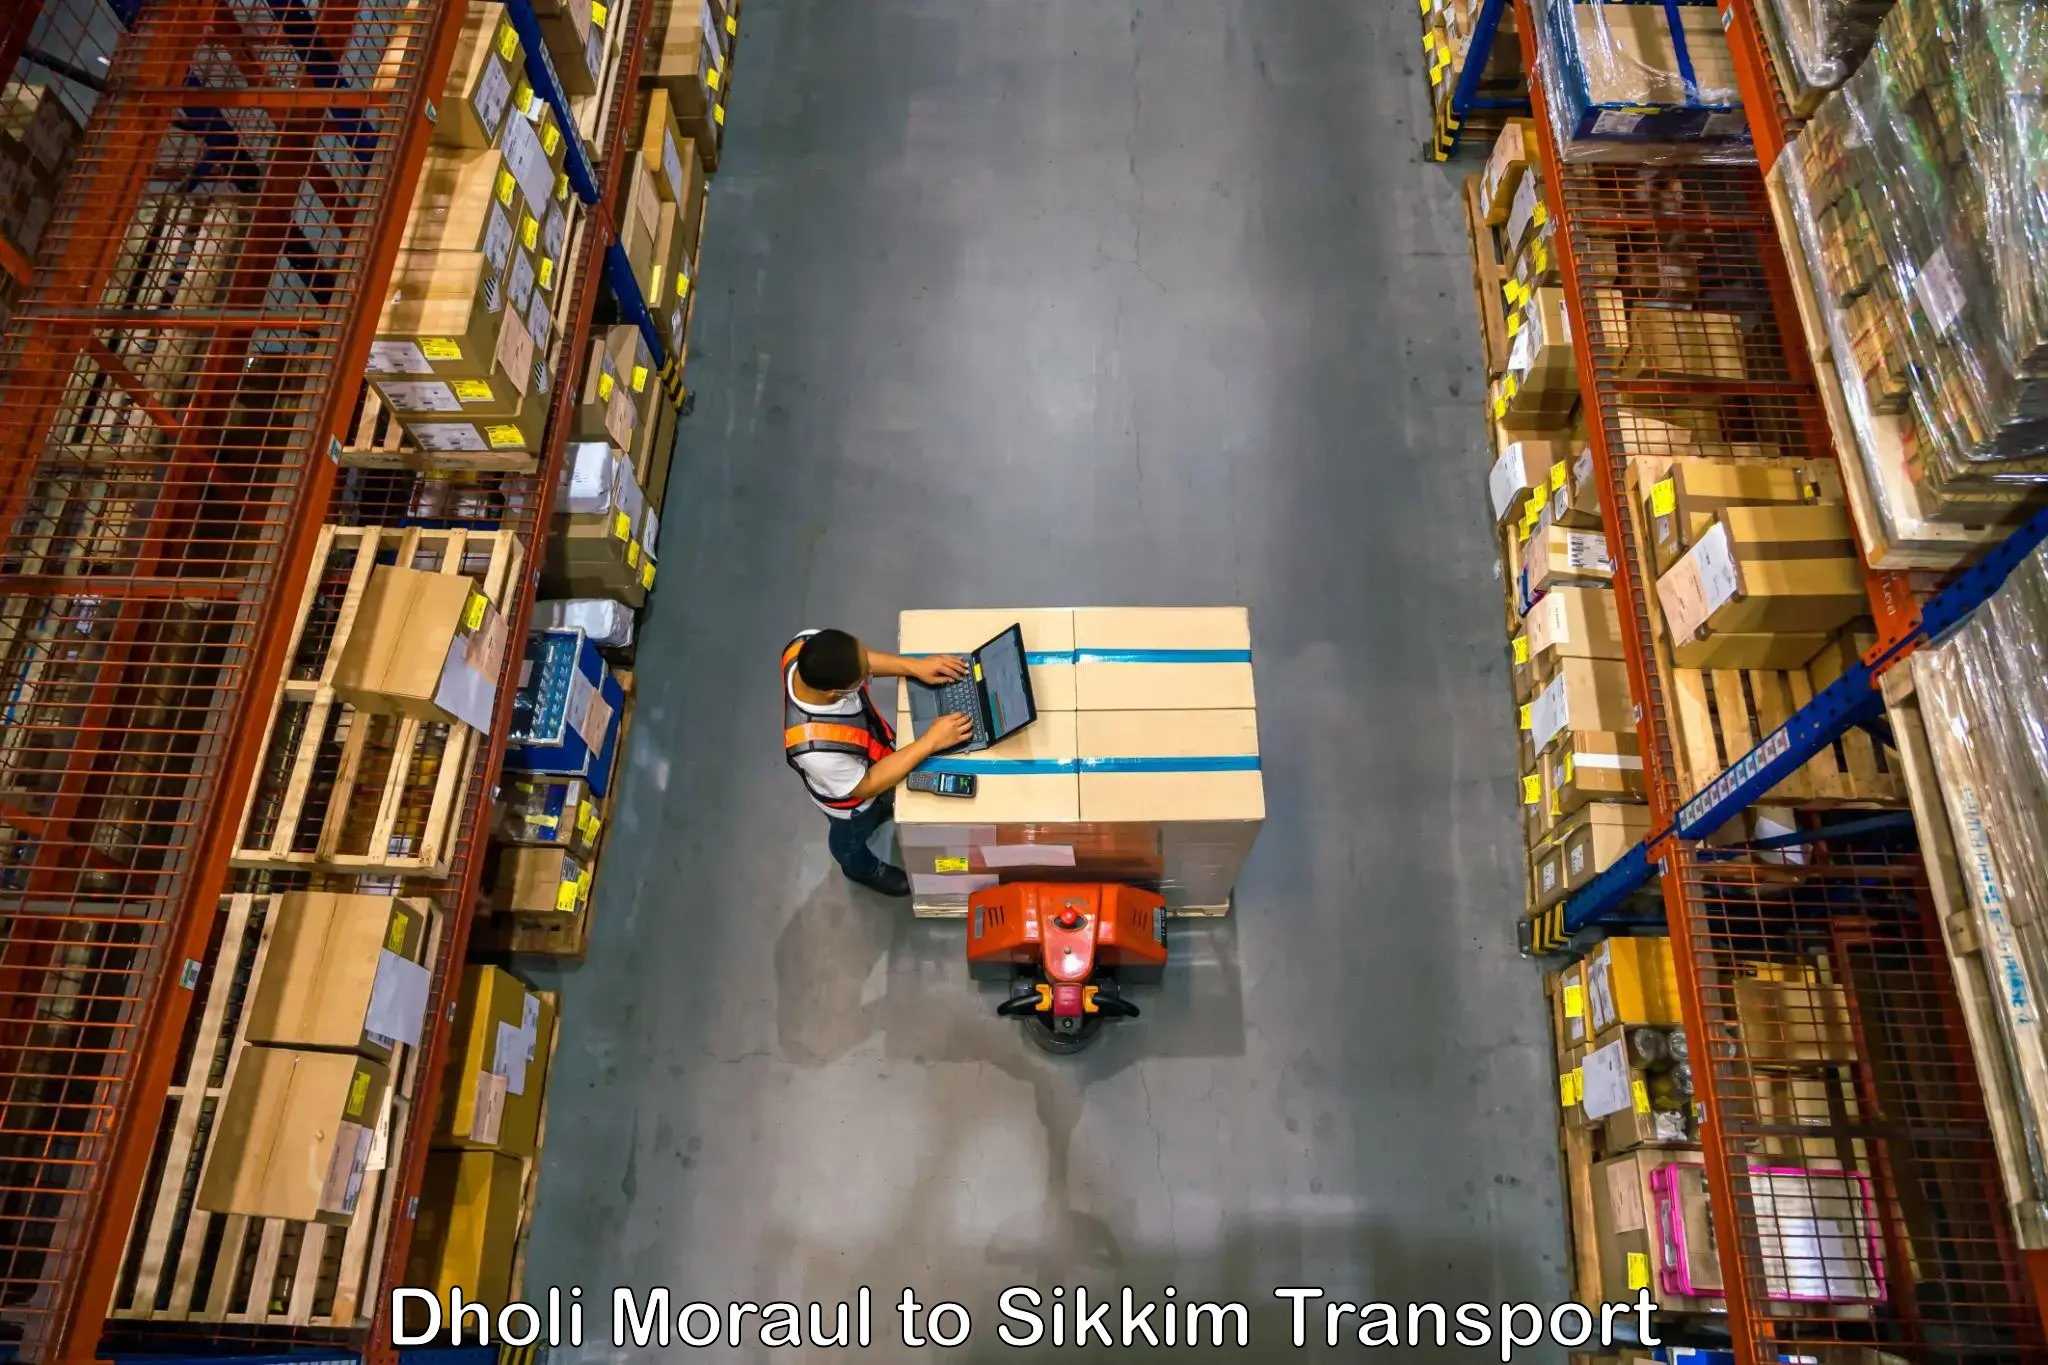 Nationwide transport services Dholi Moraul to East Sikkim